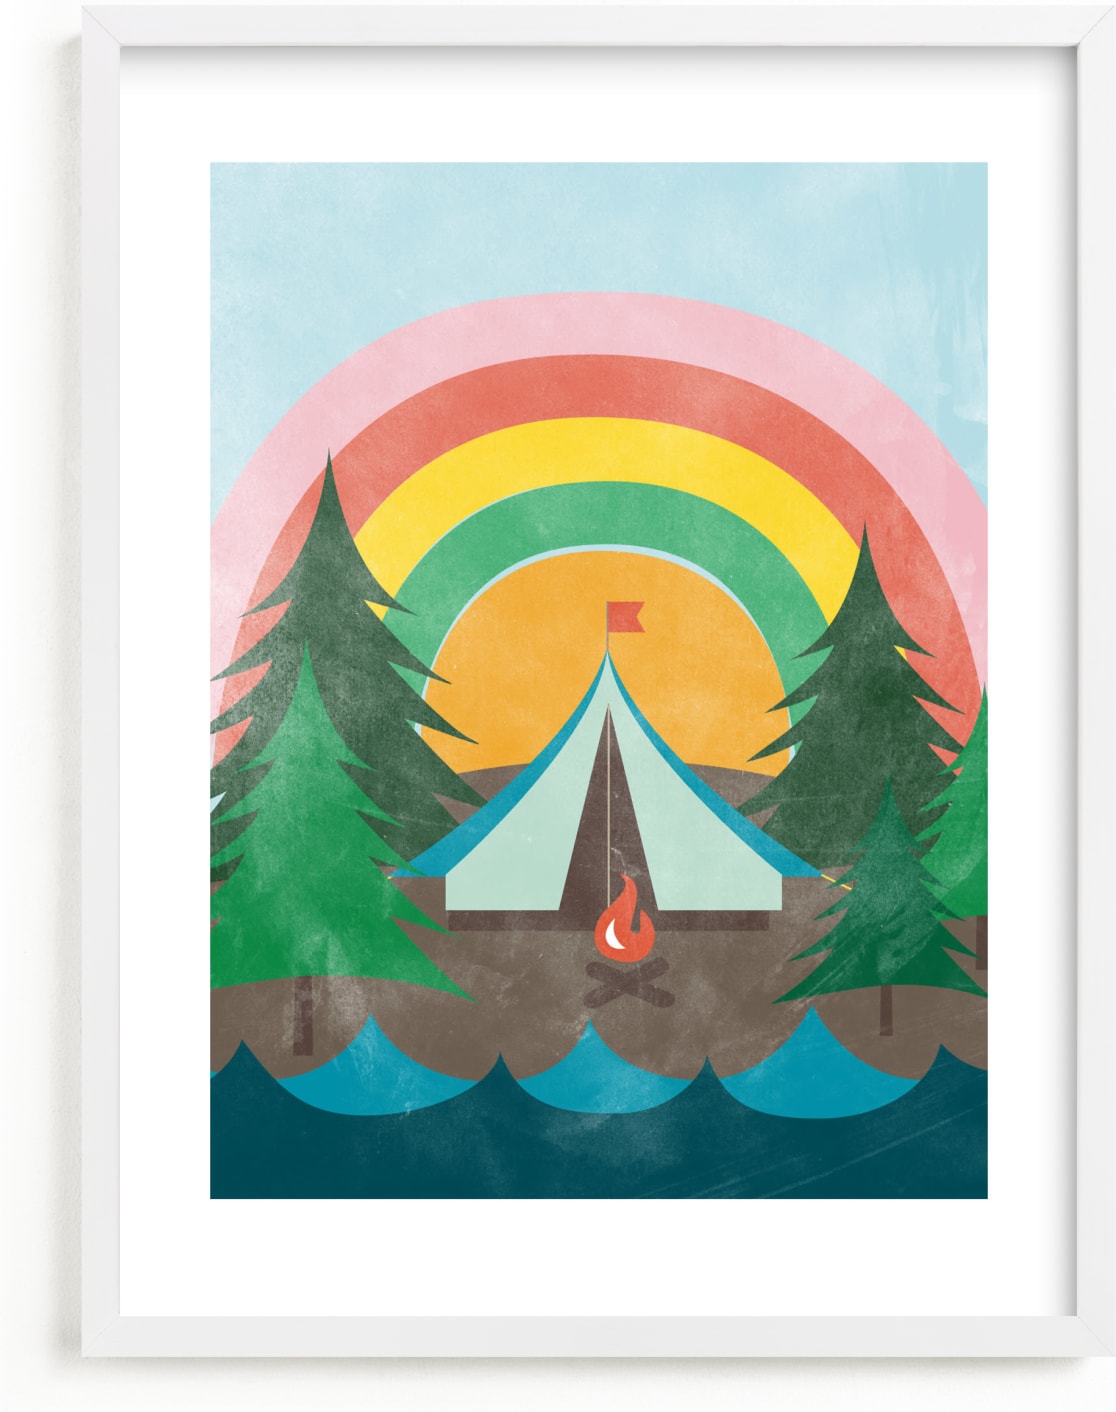 This is a blue kids wall art by Shirley Lin Schneider called Camp Rainbow.